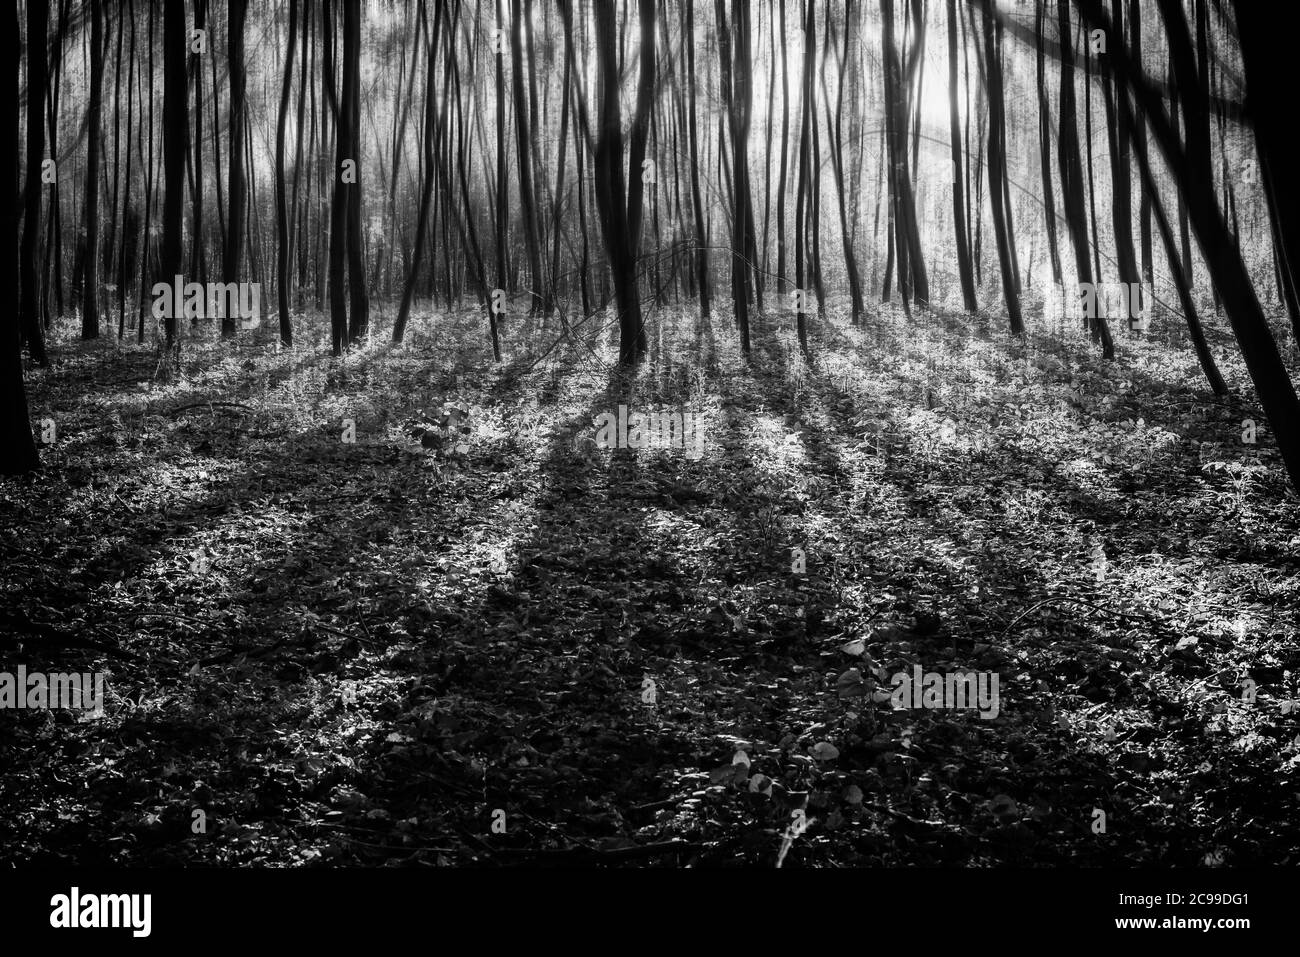 many young trees casting shadows, blurred motion in the tree tops, abstract photography, black and white Stock Photo